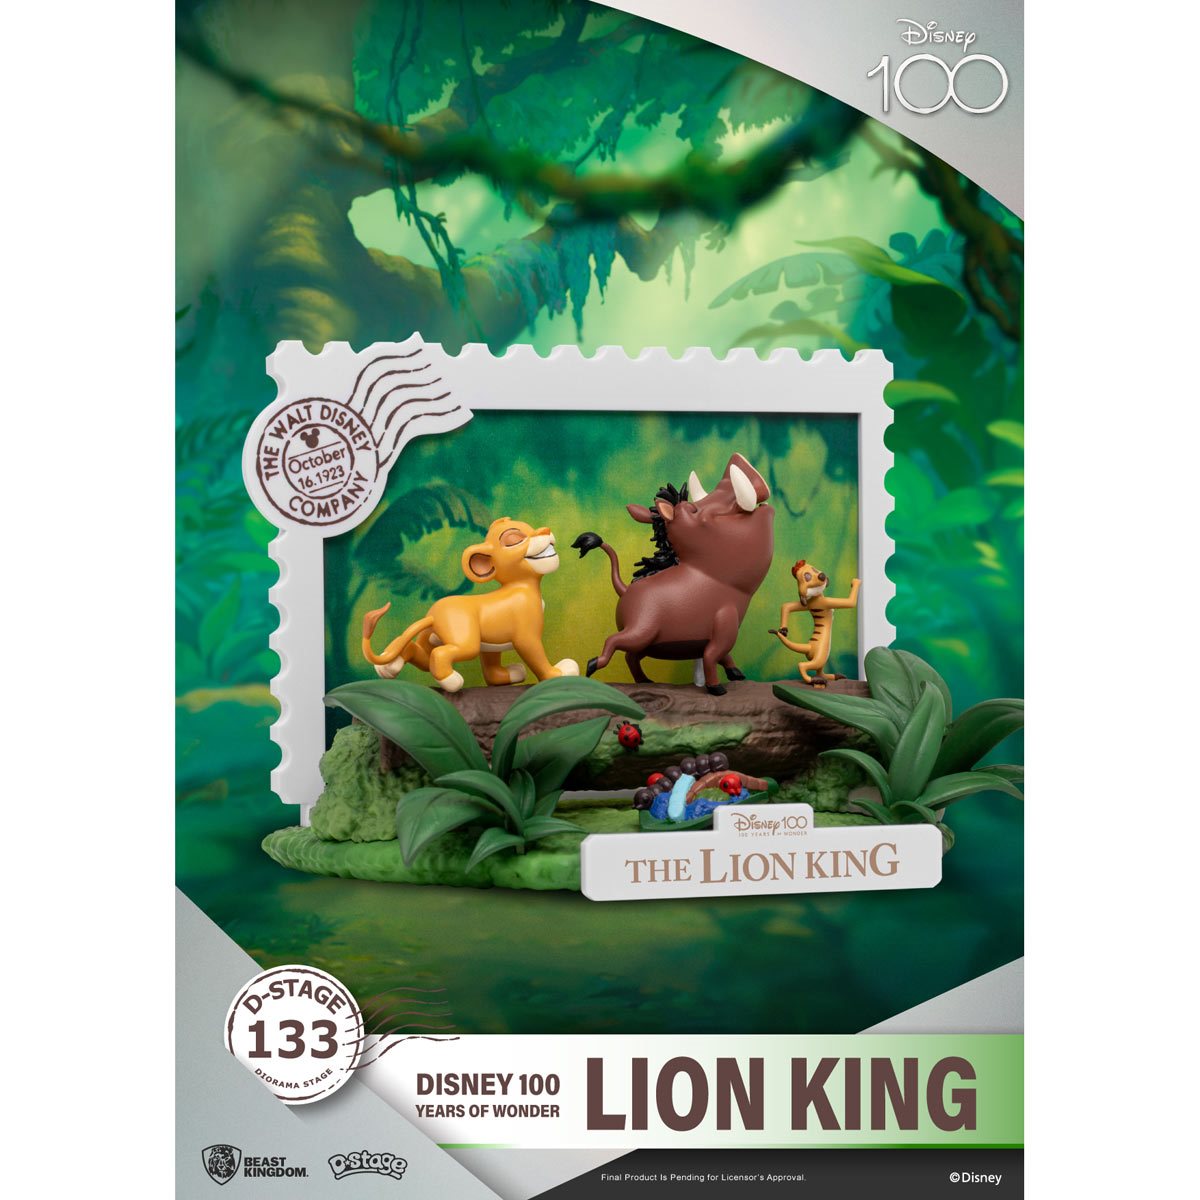 Disney 100 Years The Lion King DS-133 D-Stage Statue by Beast Kingdom -Beast Kingdom - India - www.superherotoystore.com